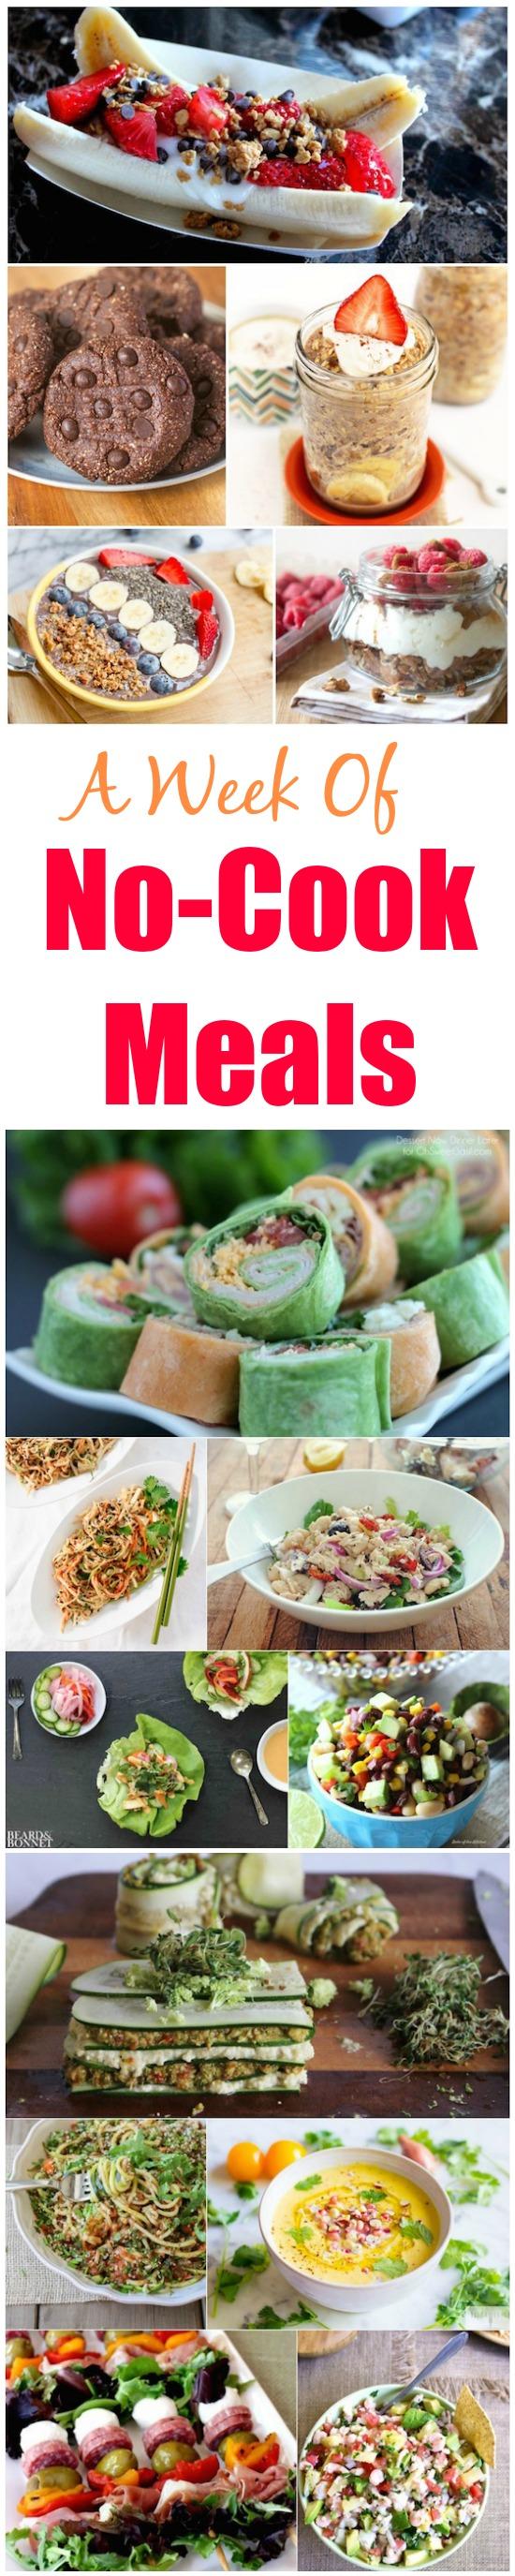 A Week of No-Cook Meal ideas to help you through the hot summer months!